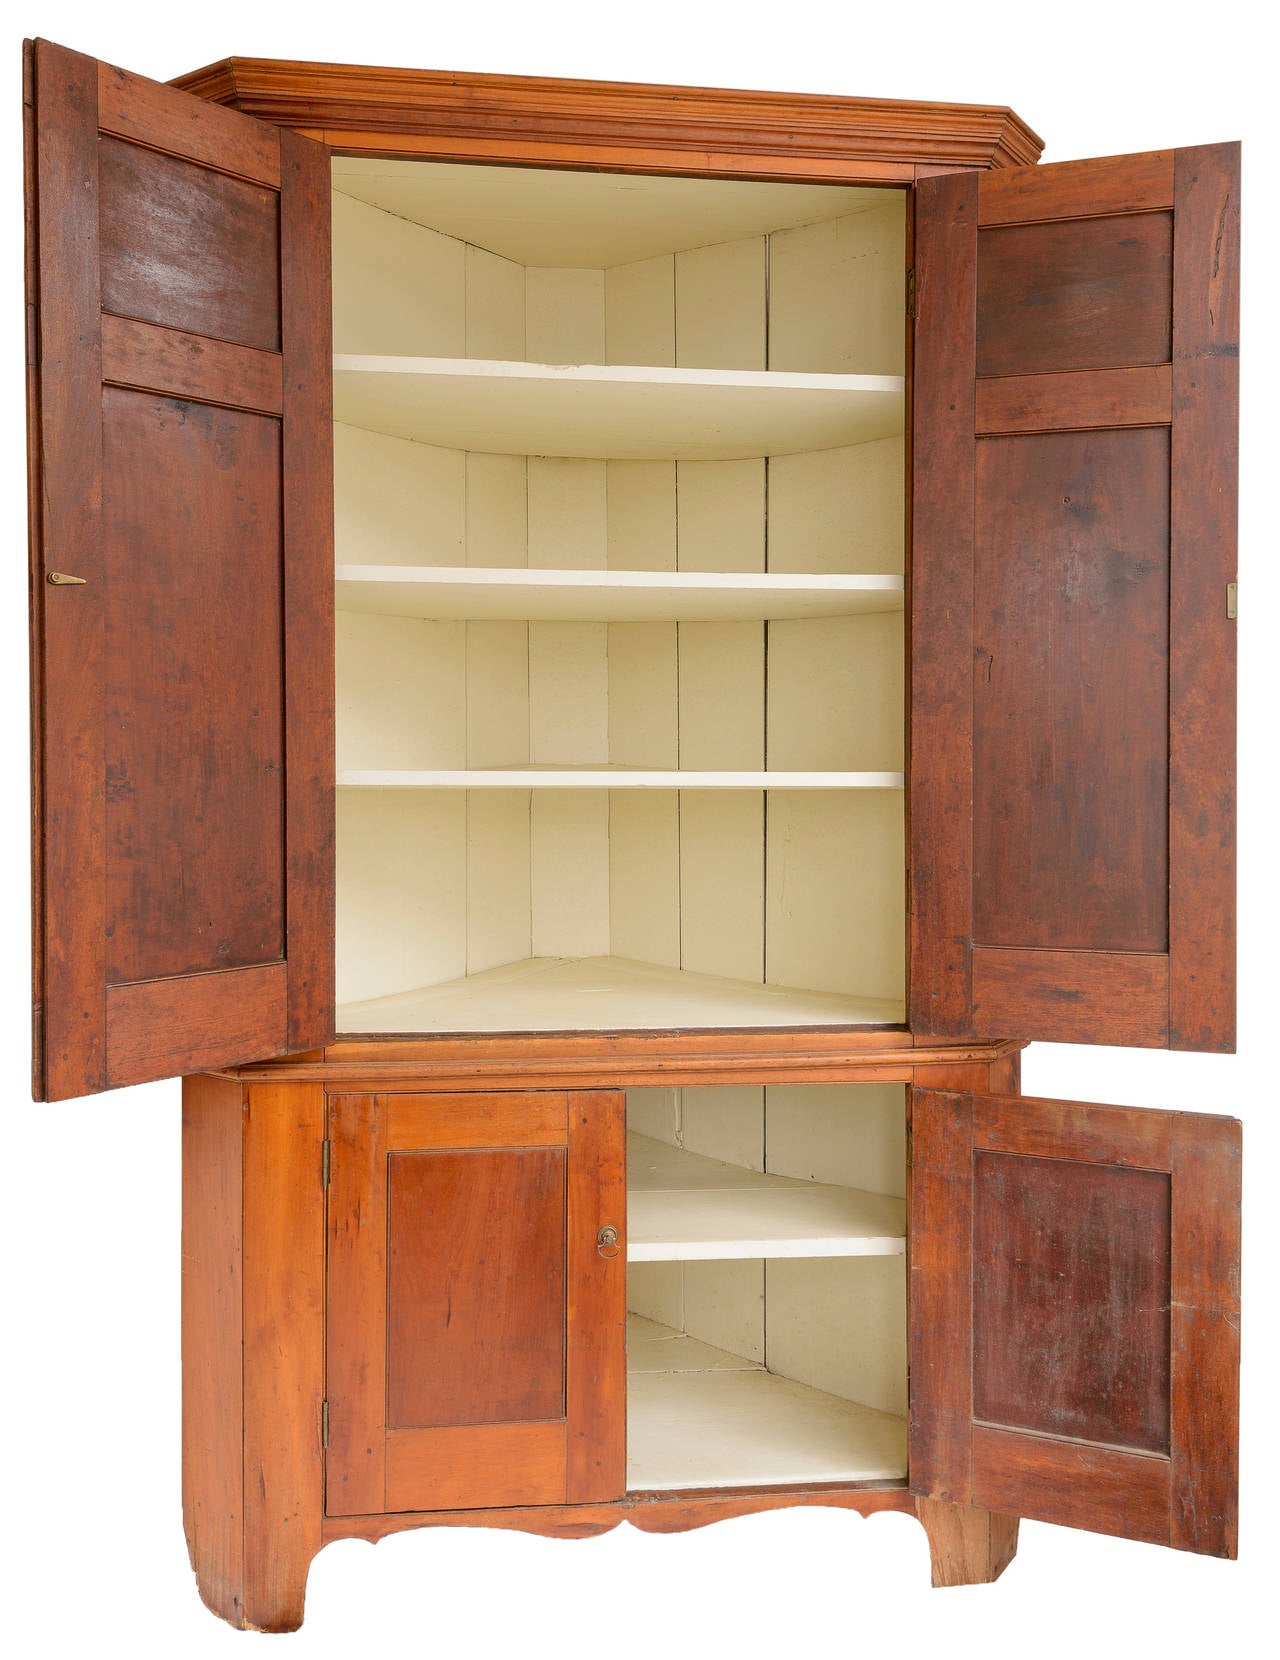 Cherrywood corner cupboard found in Kentucky. The corner cabinet has four doors with six blank panels on front. Beautiful exterior finish, painted shelves in upper cabinet. One lower shelf.